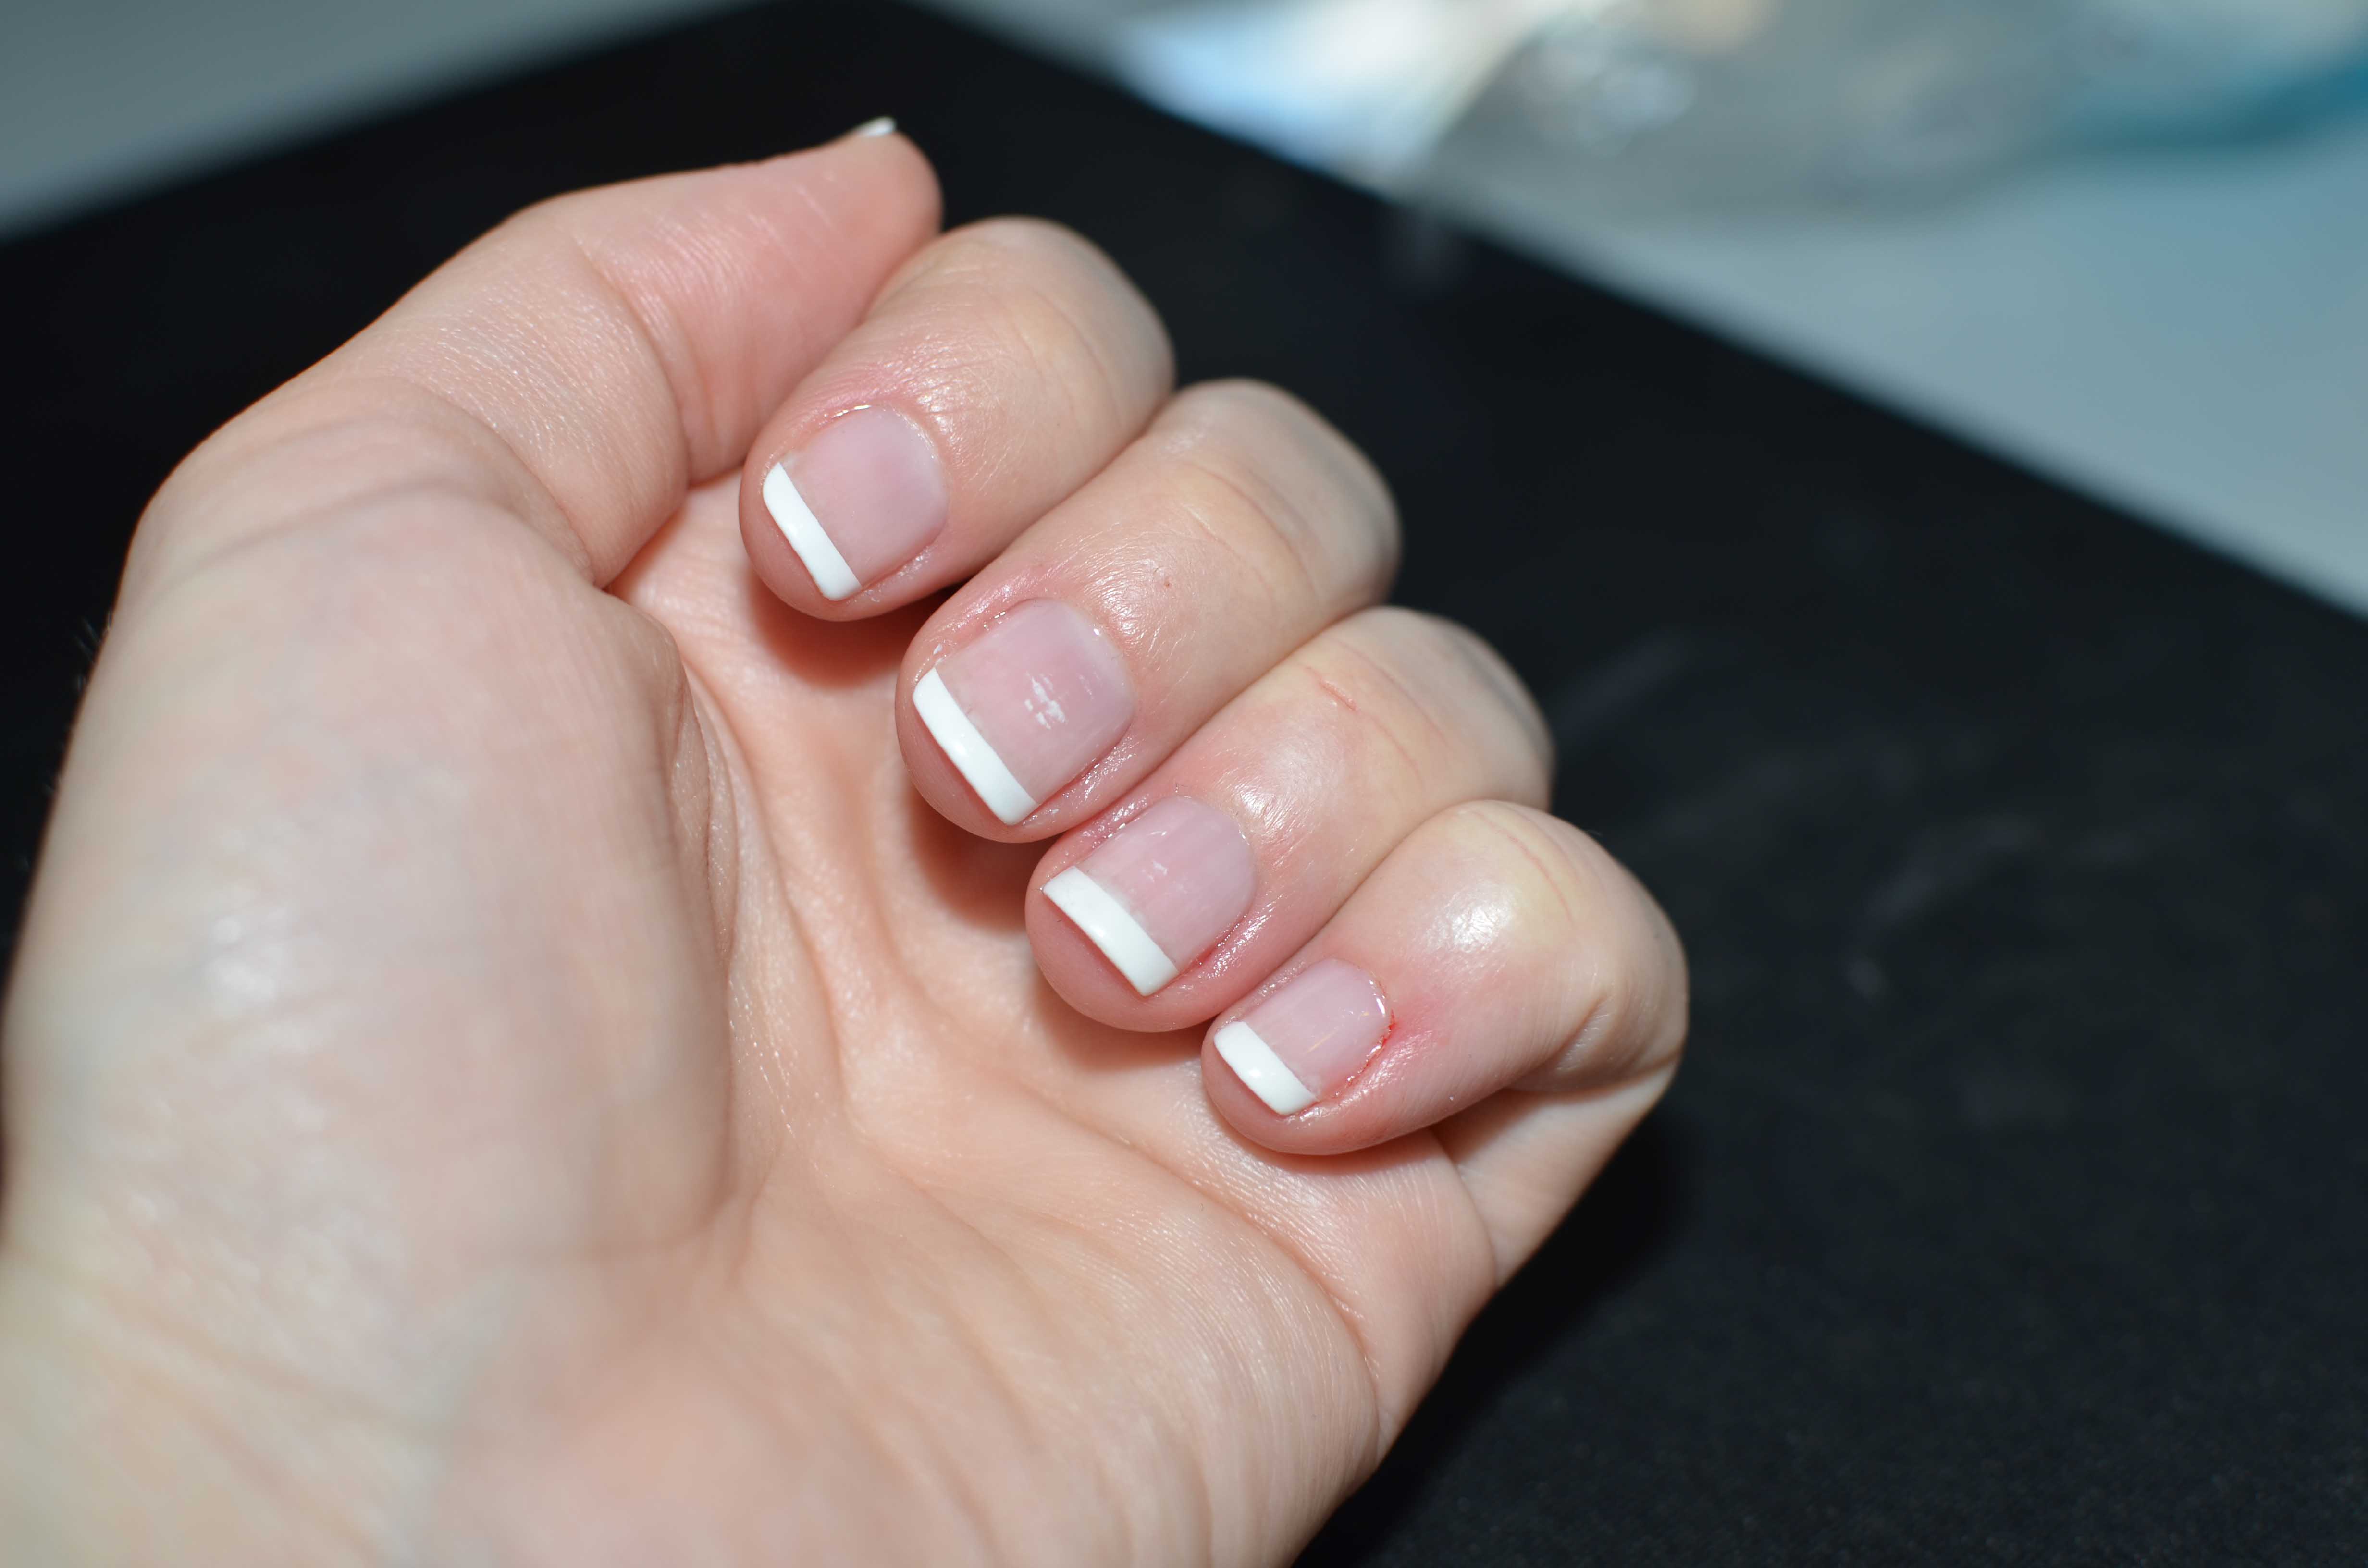 French tip nails - wide 6